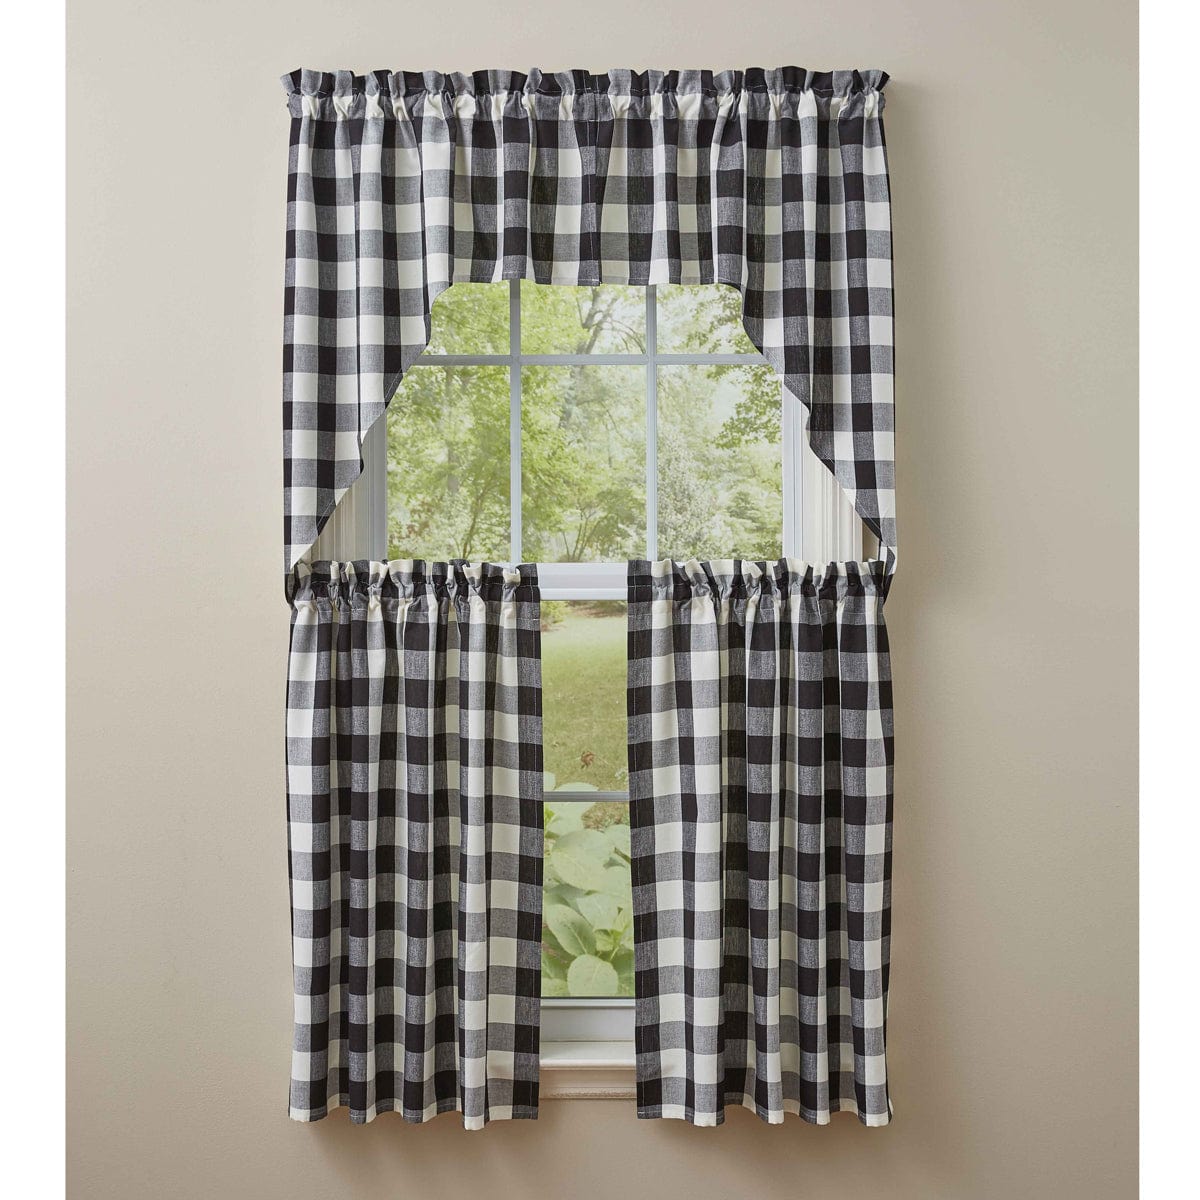 Wicklow Check in Black &amp; Cream Swag Pair 36&quot; Long Unlined-Park Designs-The Village Merchant